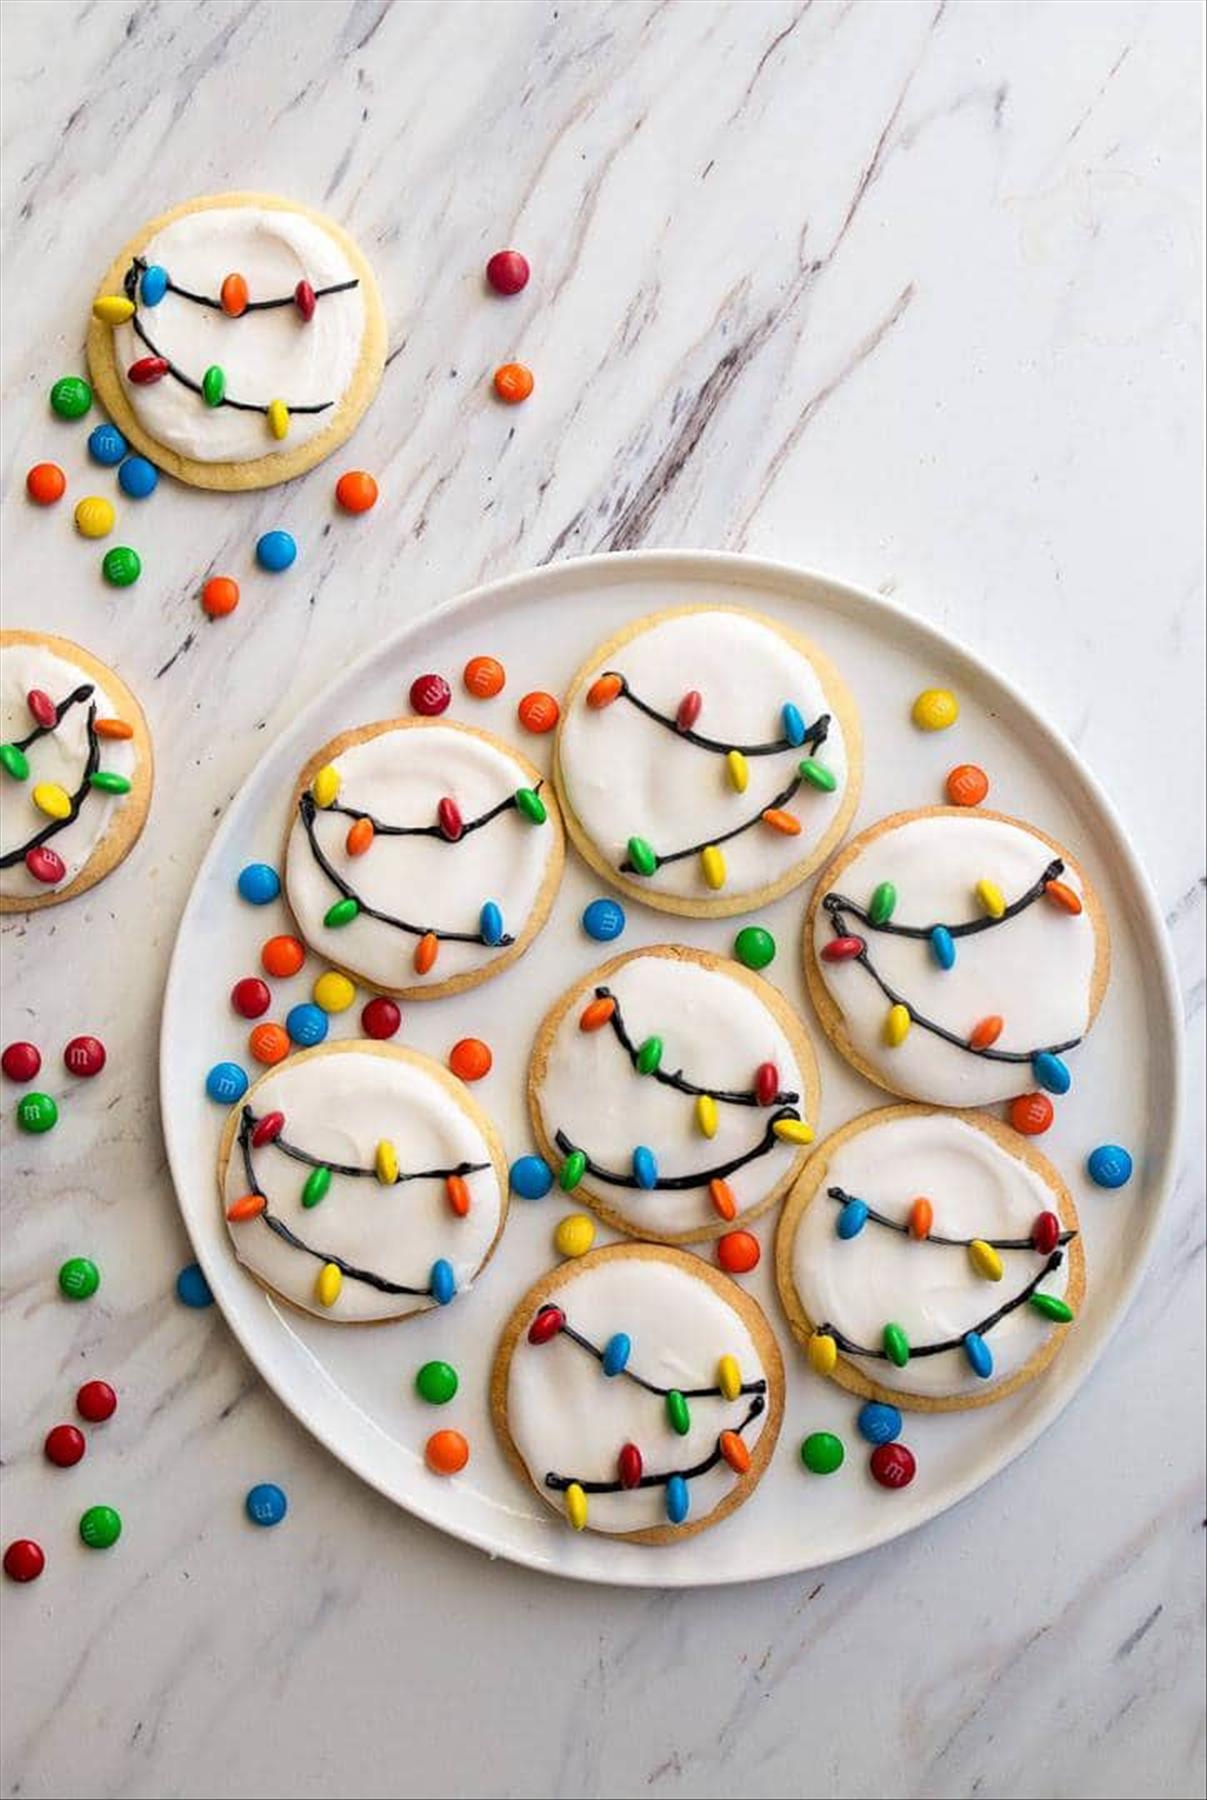  Yummy Christmas Cookie Ideas For Holiday Party